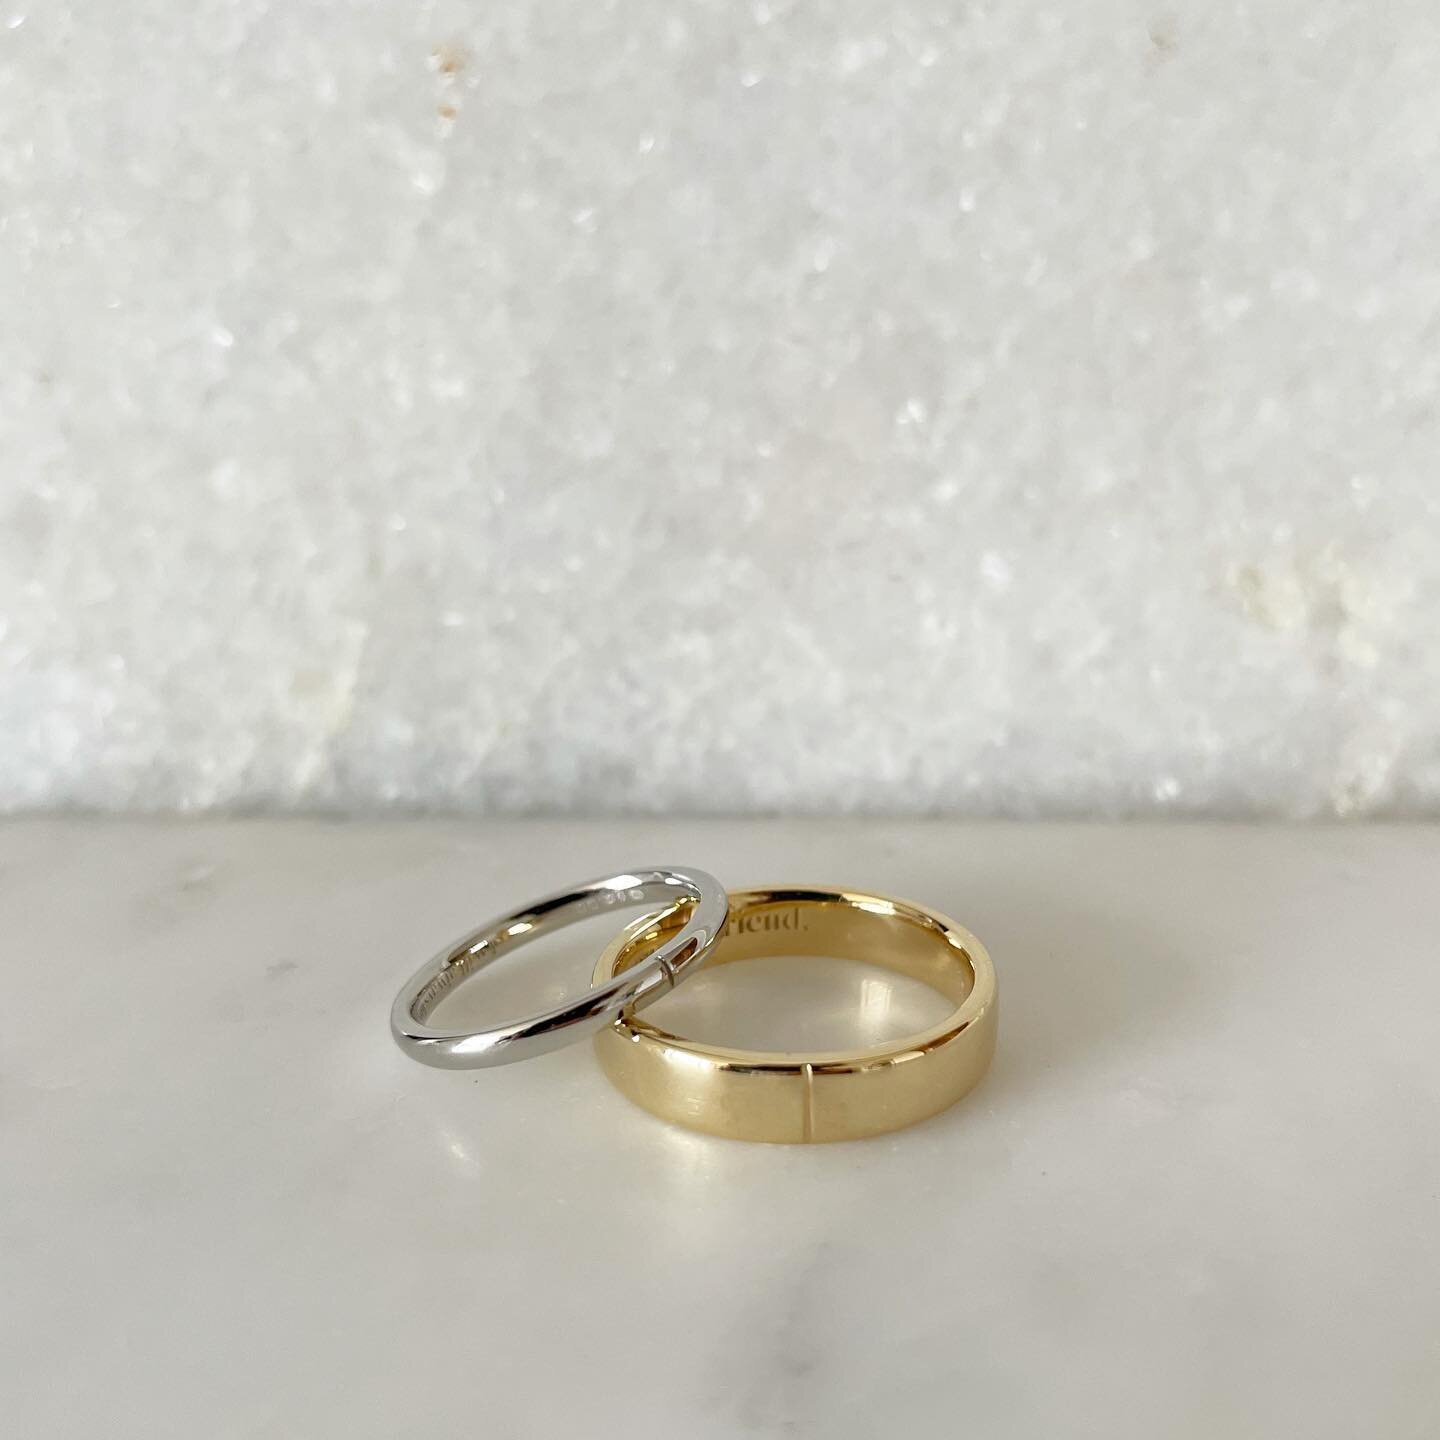 I adore the simplicity of these gorgeous wedding bands in 100% recycled 18ct yellow gold &amp; platinum. The carved line adding a understands detail to tie the rings together. 

#kindwedding #weddingrings #ethicalweddingrings #rings #ecowedding #gree